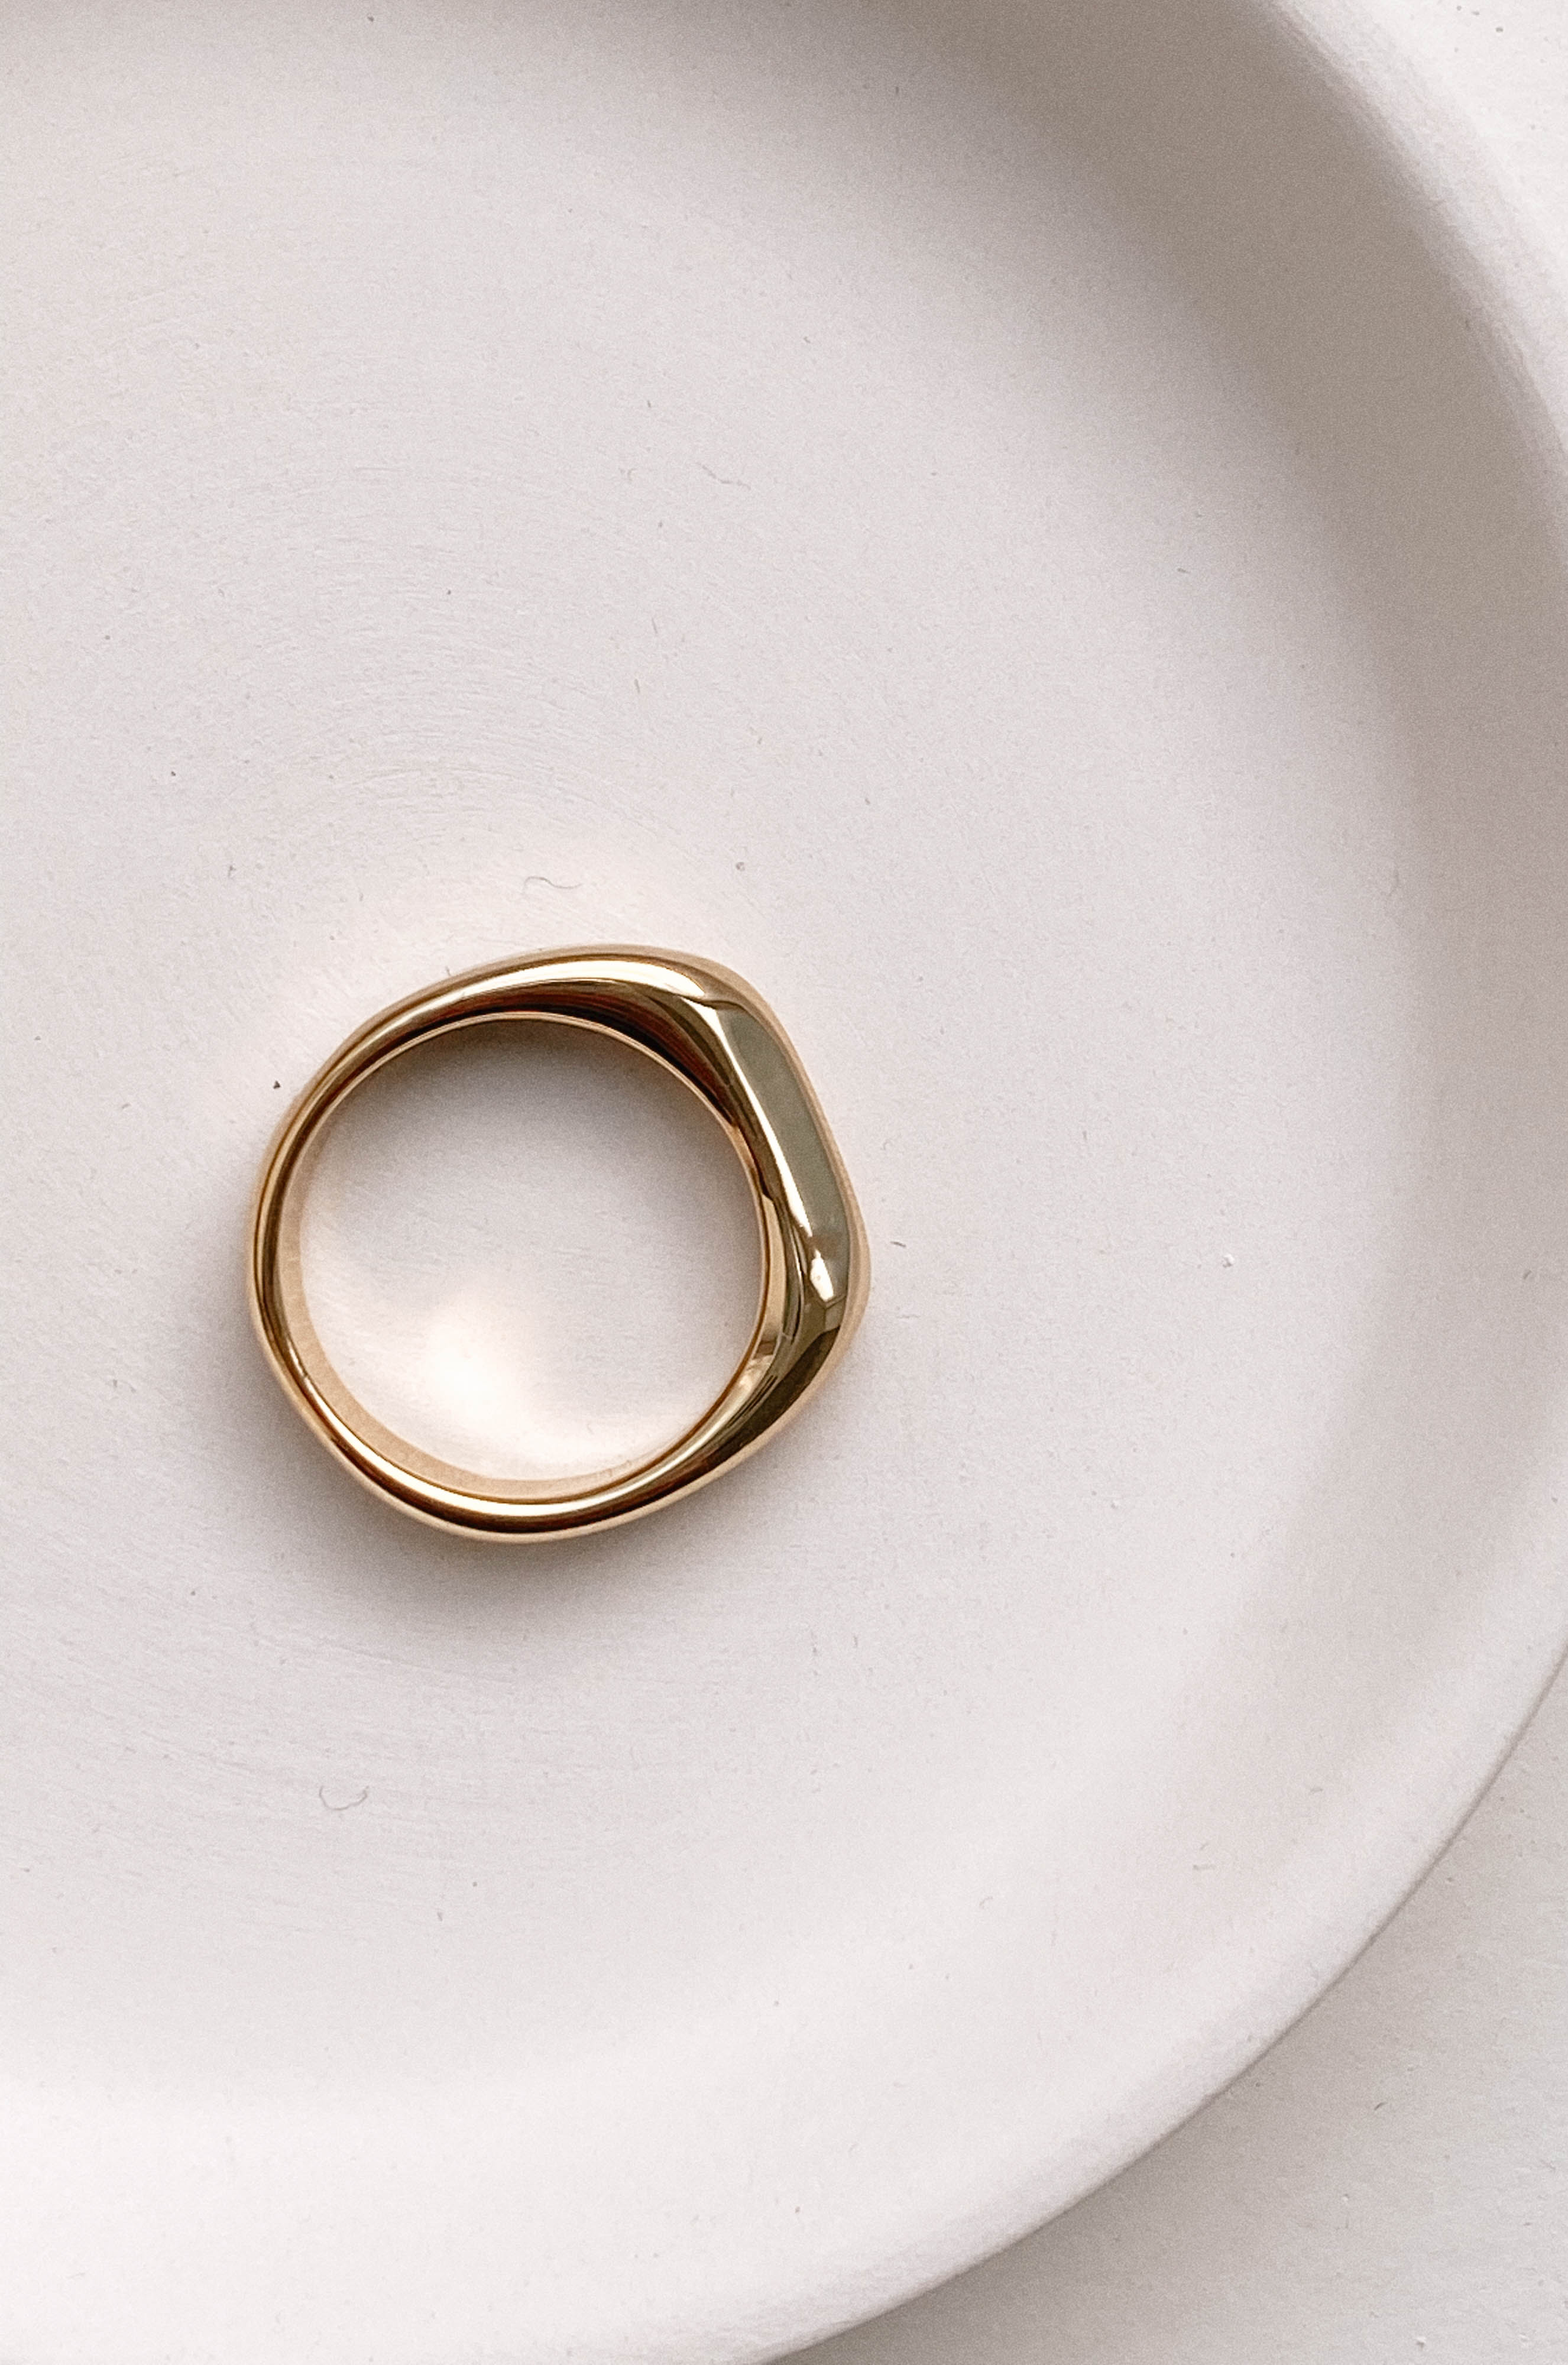 fashionable gold rings that are modern and minimal